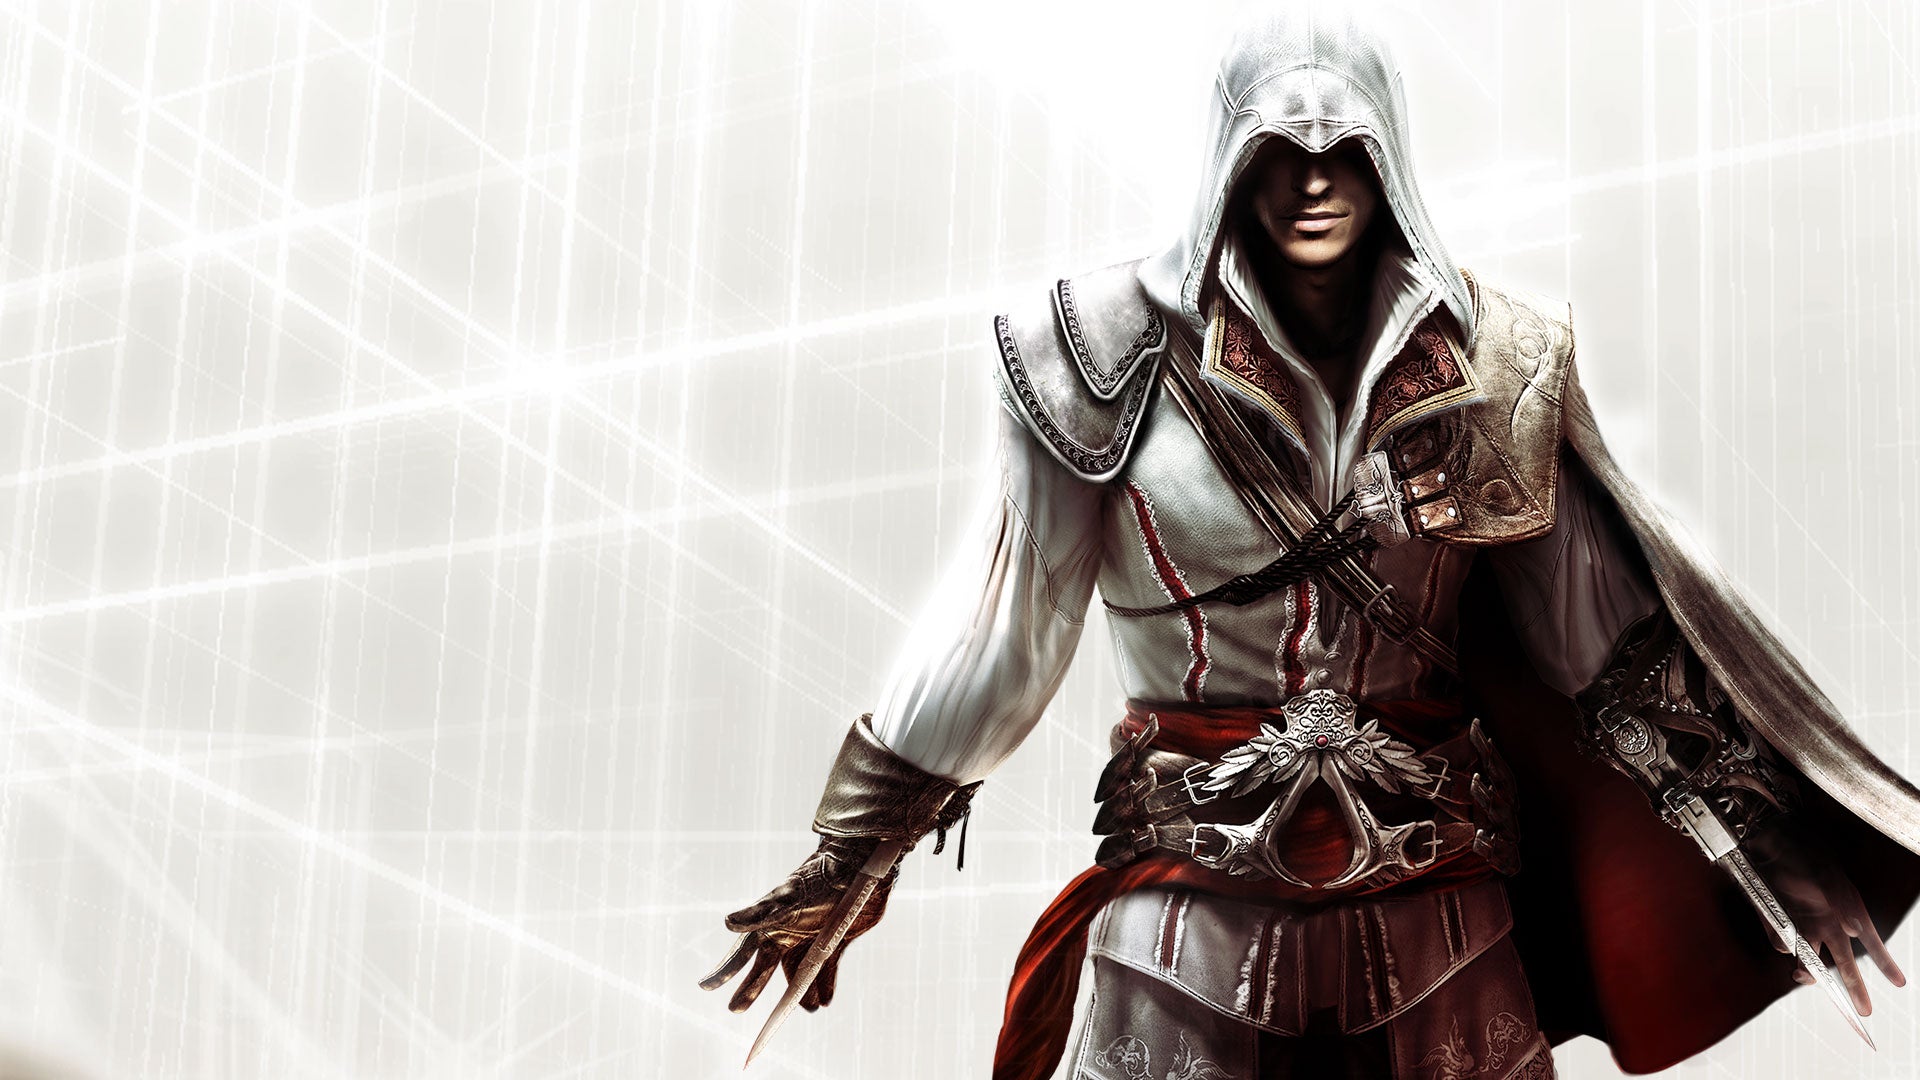 How To Get A Free Copy Of ‘Assassin’s Creed II’ This Week